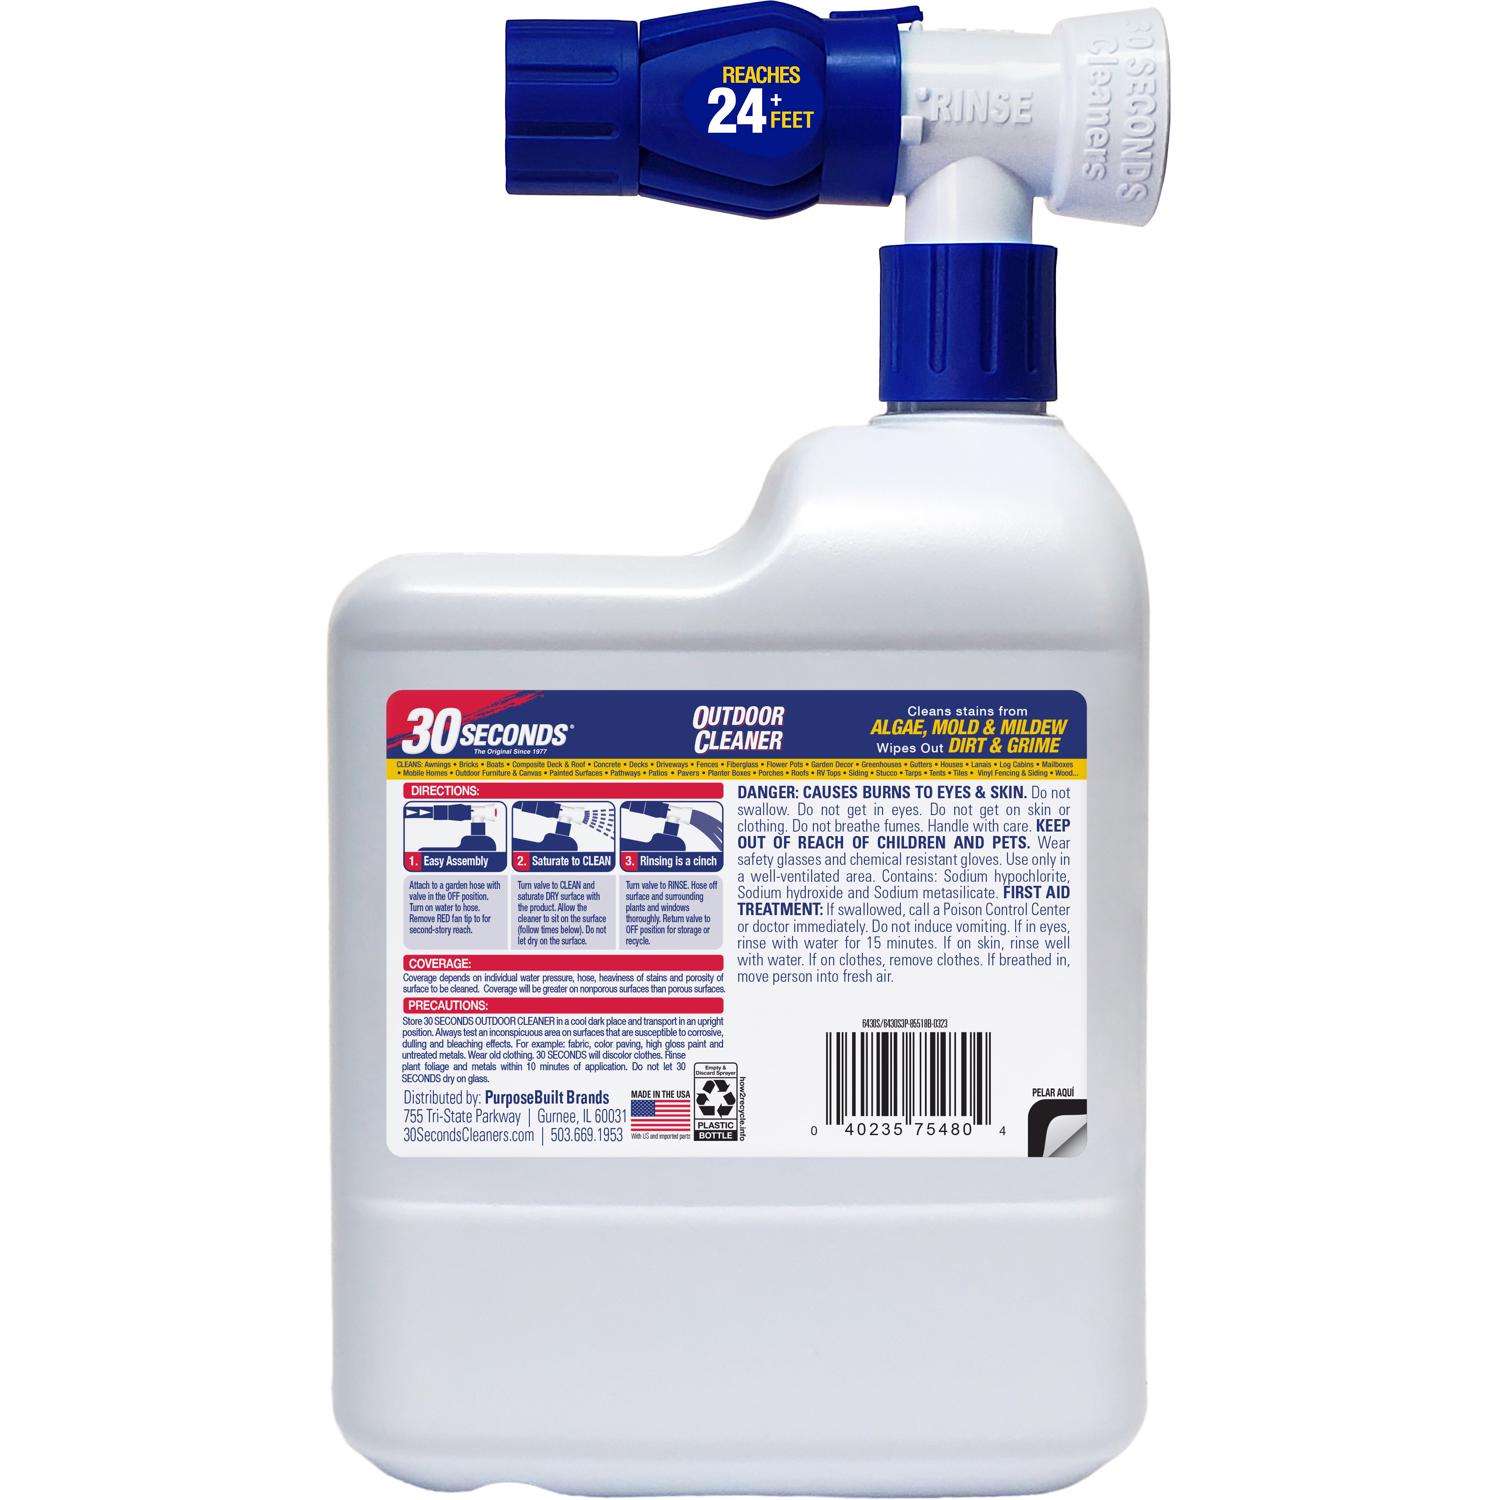 Rain-X 24 oz. 2-in-1 Glass Cleaner and Rain Repellent at Tractor Supply Co.